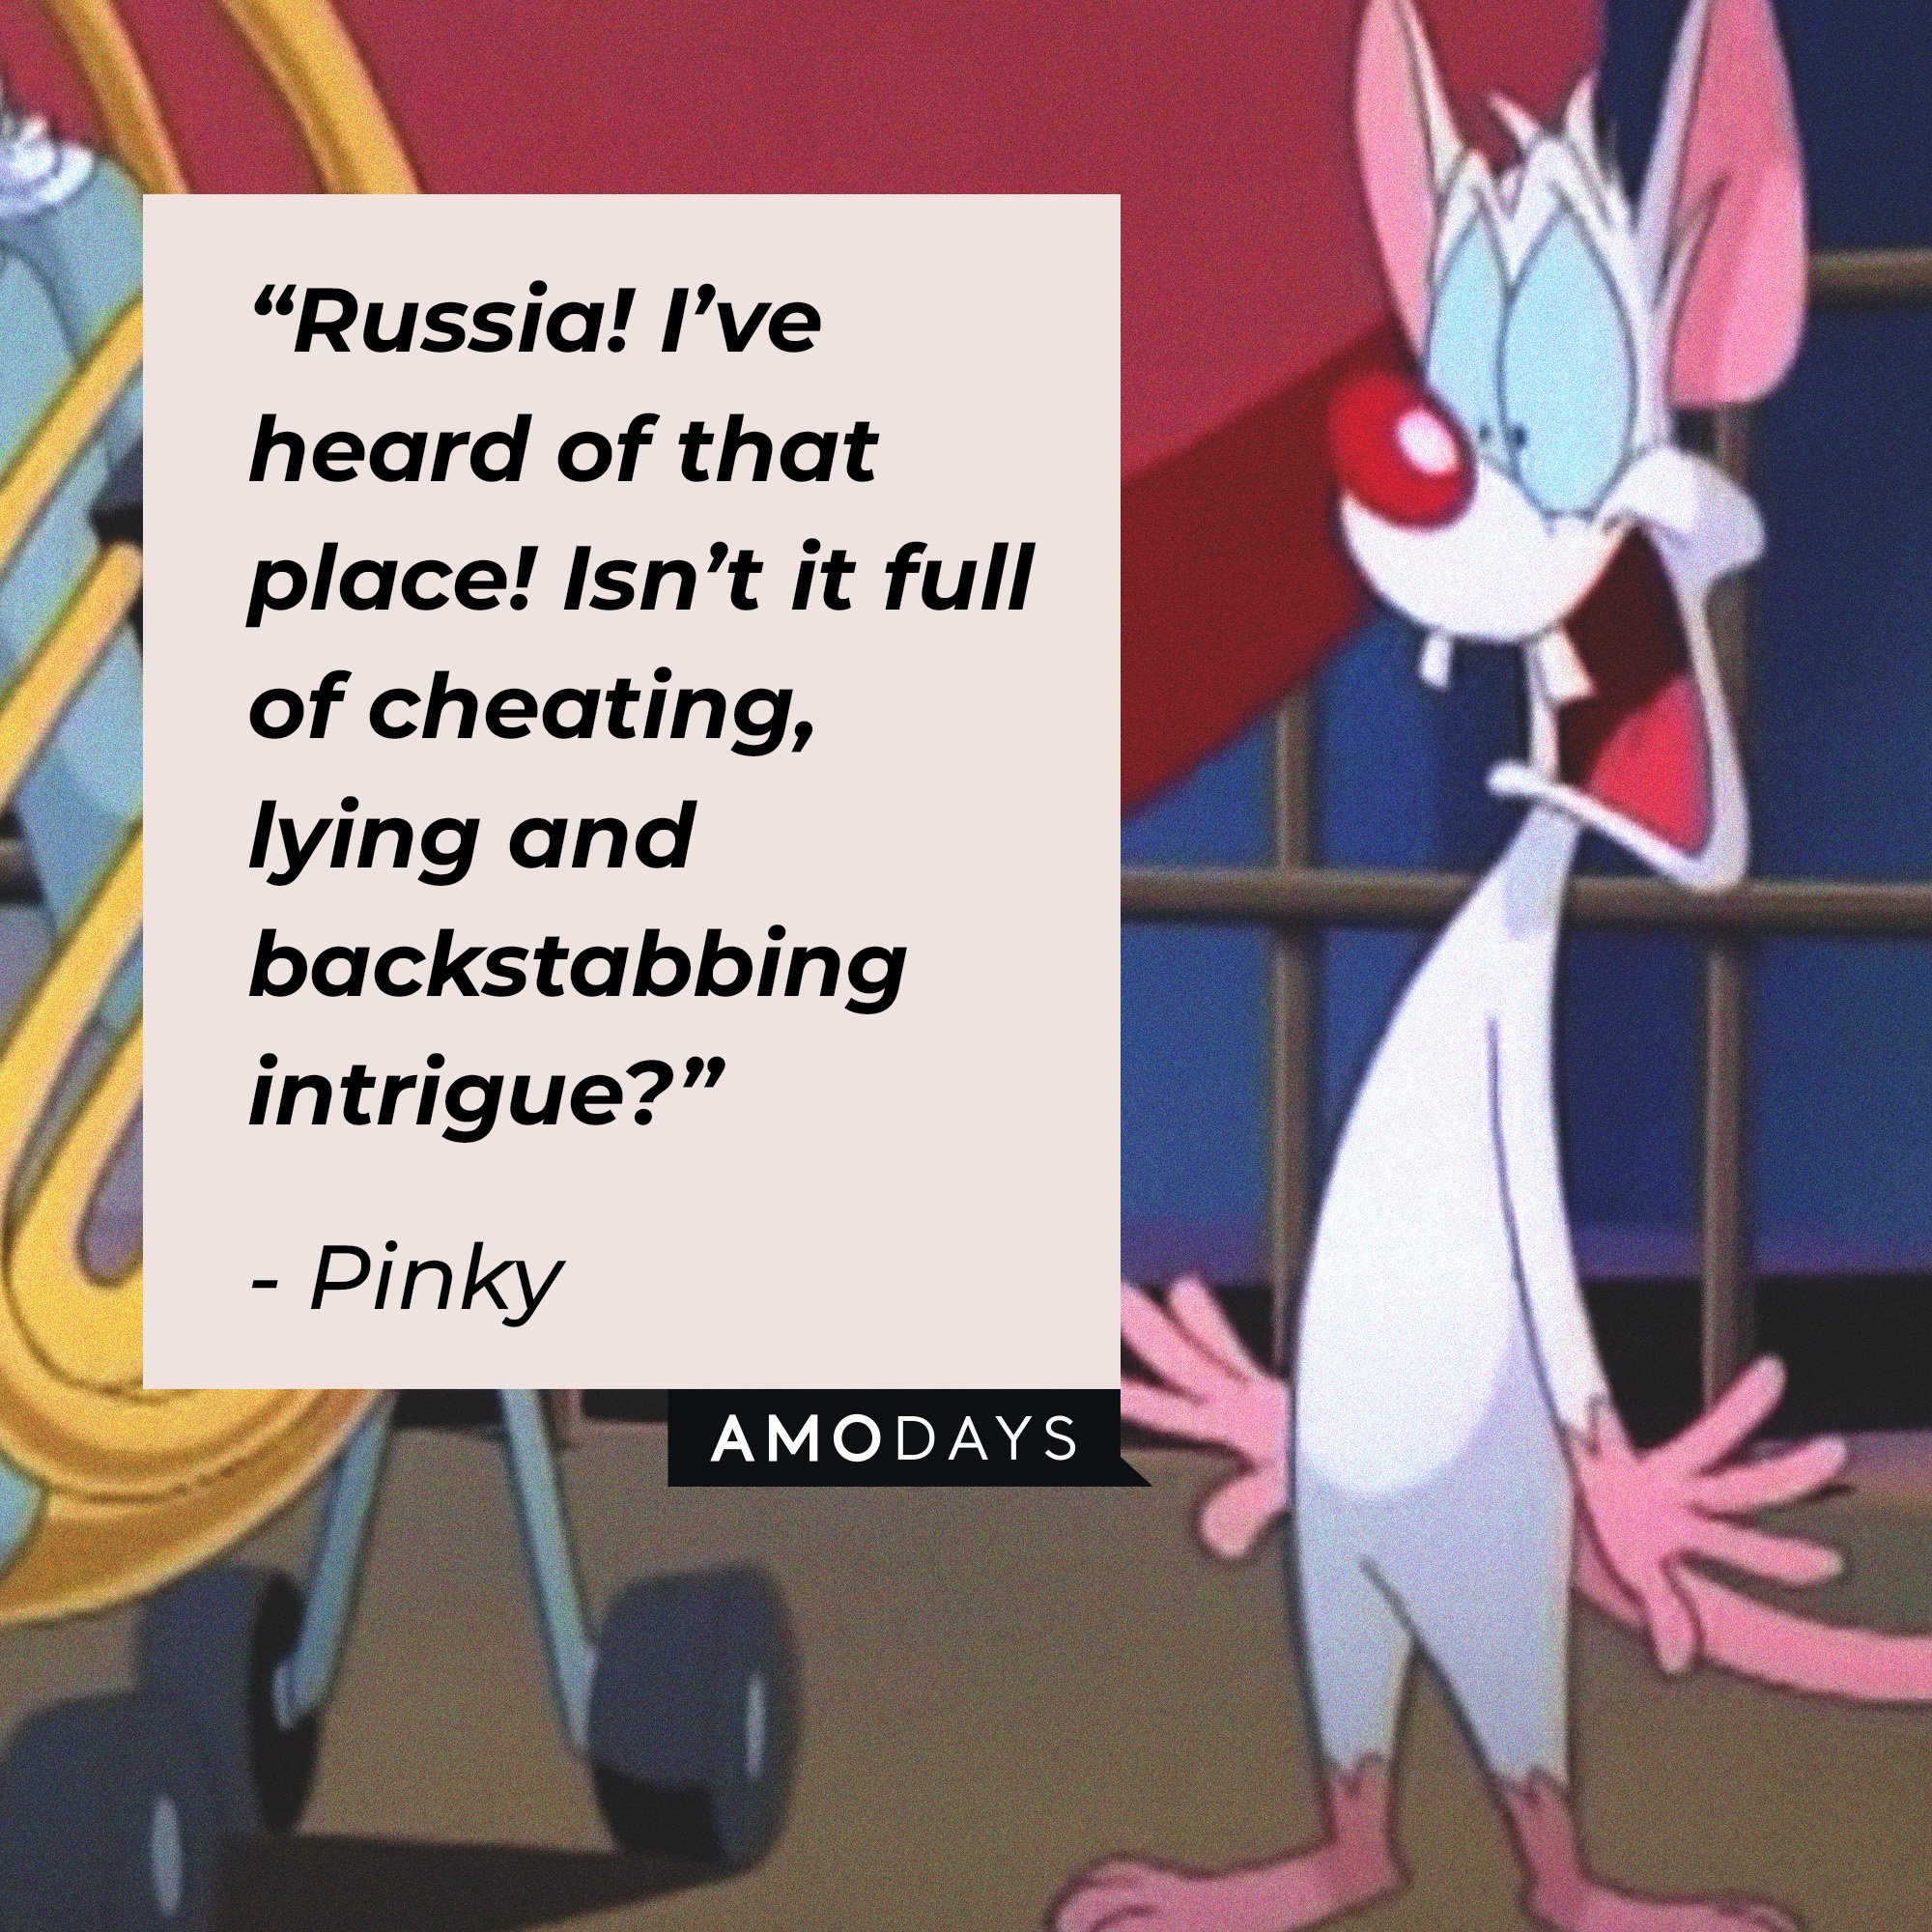 Pinky's quote: “Russia! I’ve heard of that place! Isn’t it full of cheating, lying and backstabbing intrigue?” | Image: AmoDays